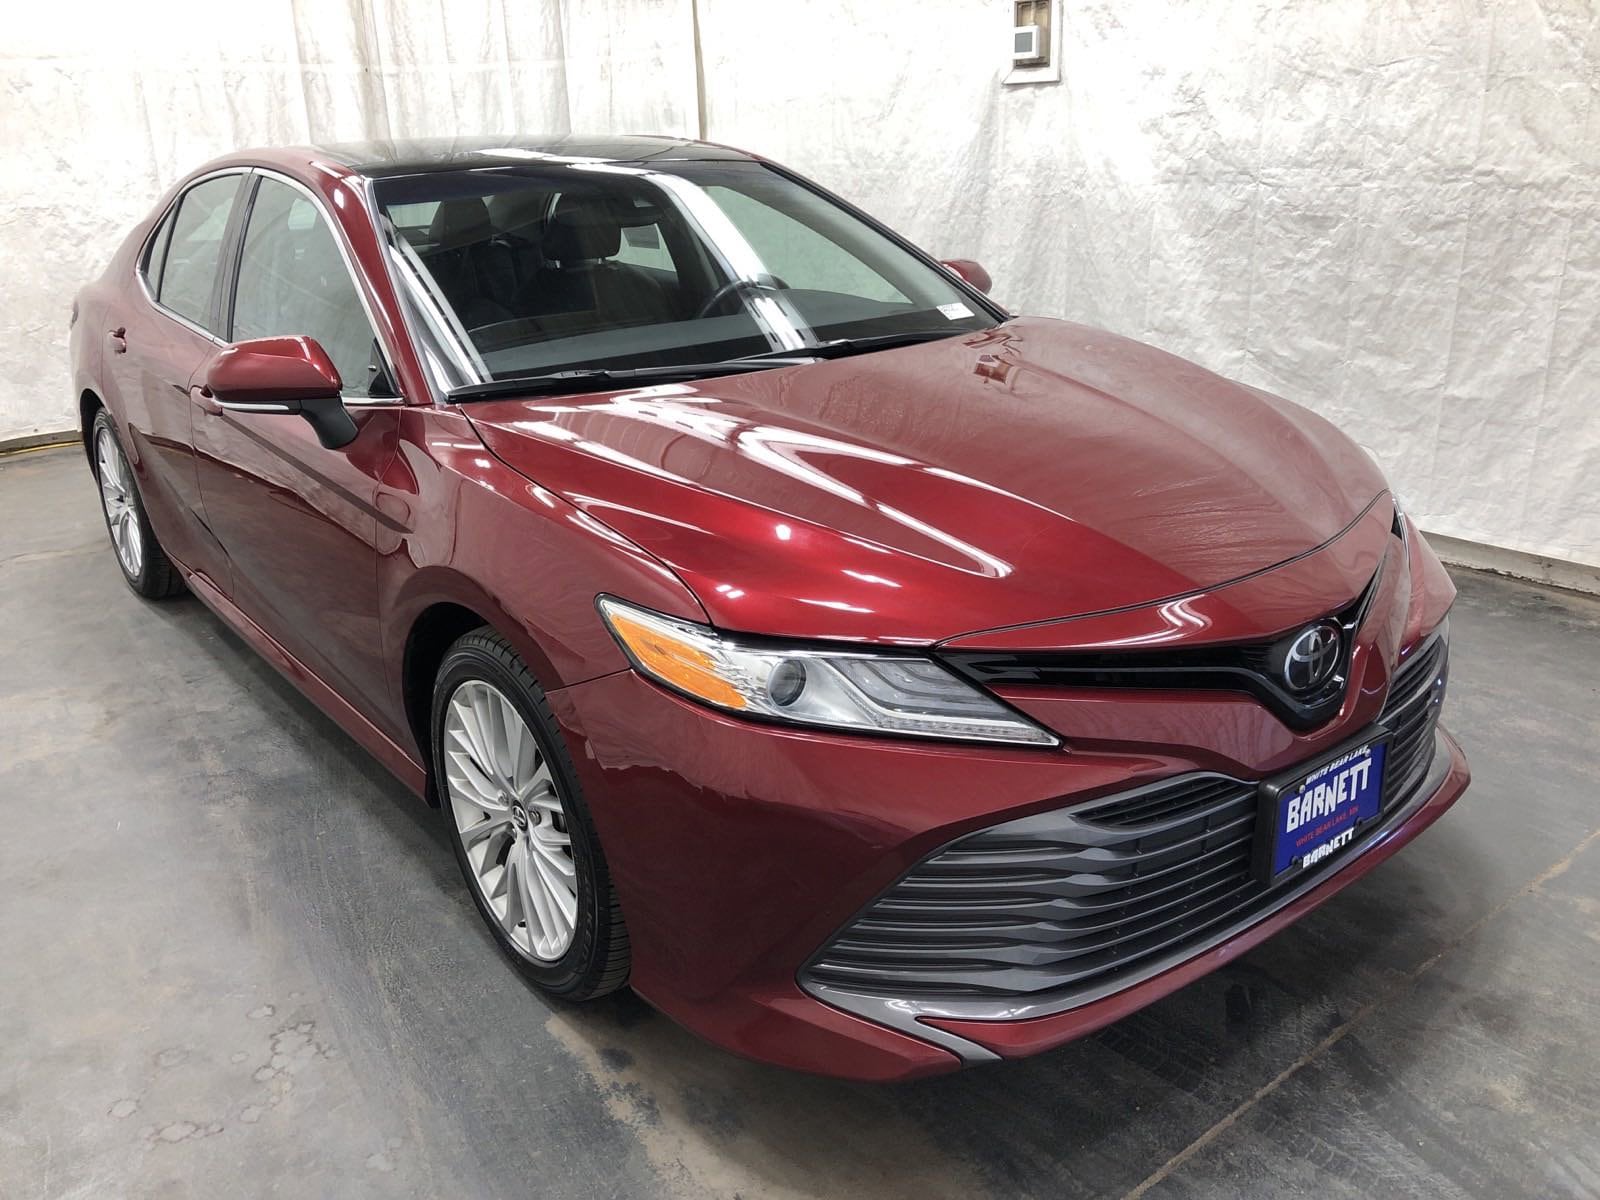 Used 2020 Toyota Camry XLE with VIN 4T1F11AK4LU890928 for sale in White Bear Lake, Minnesota